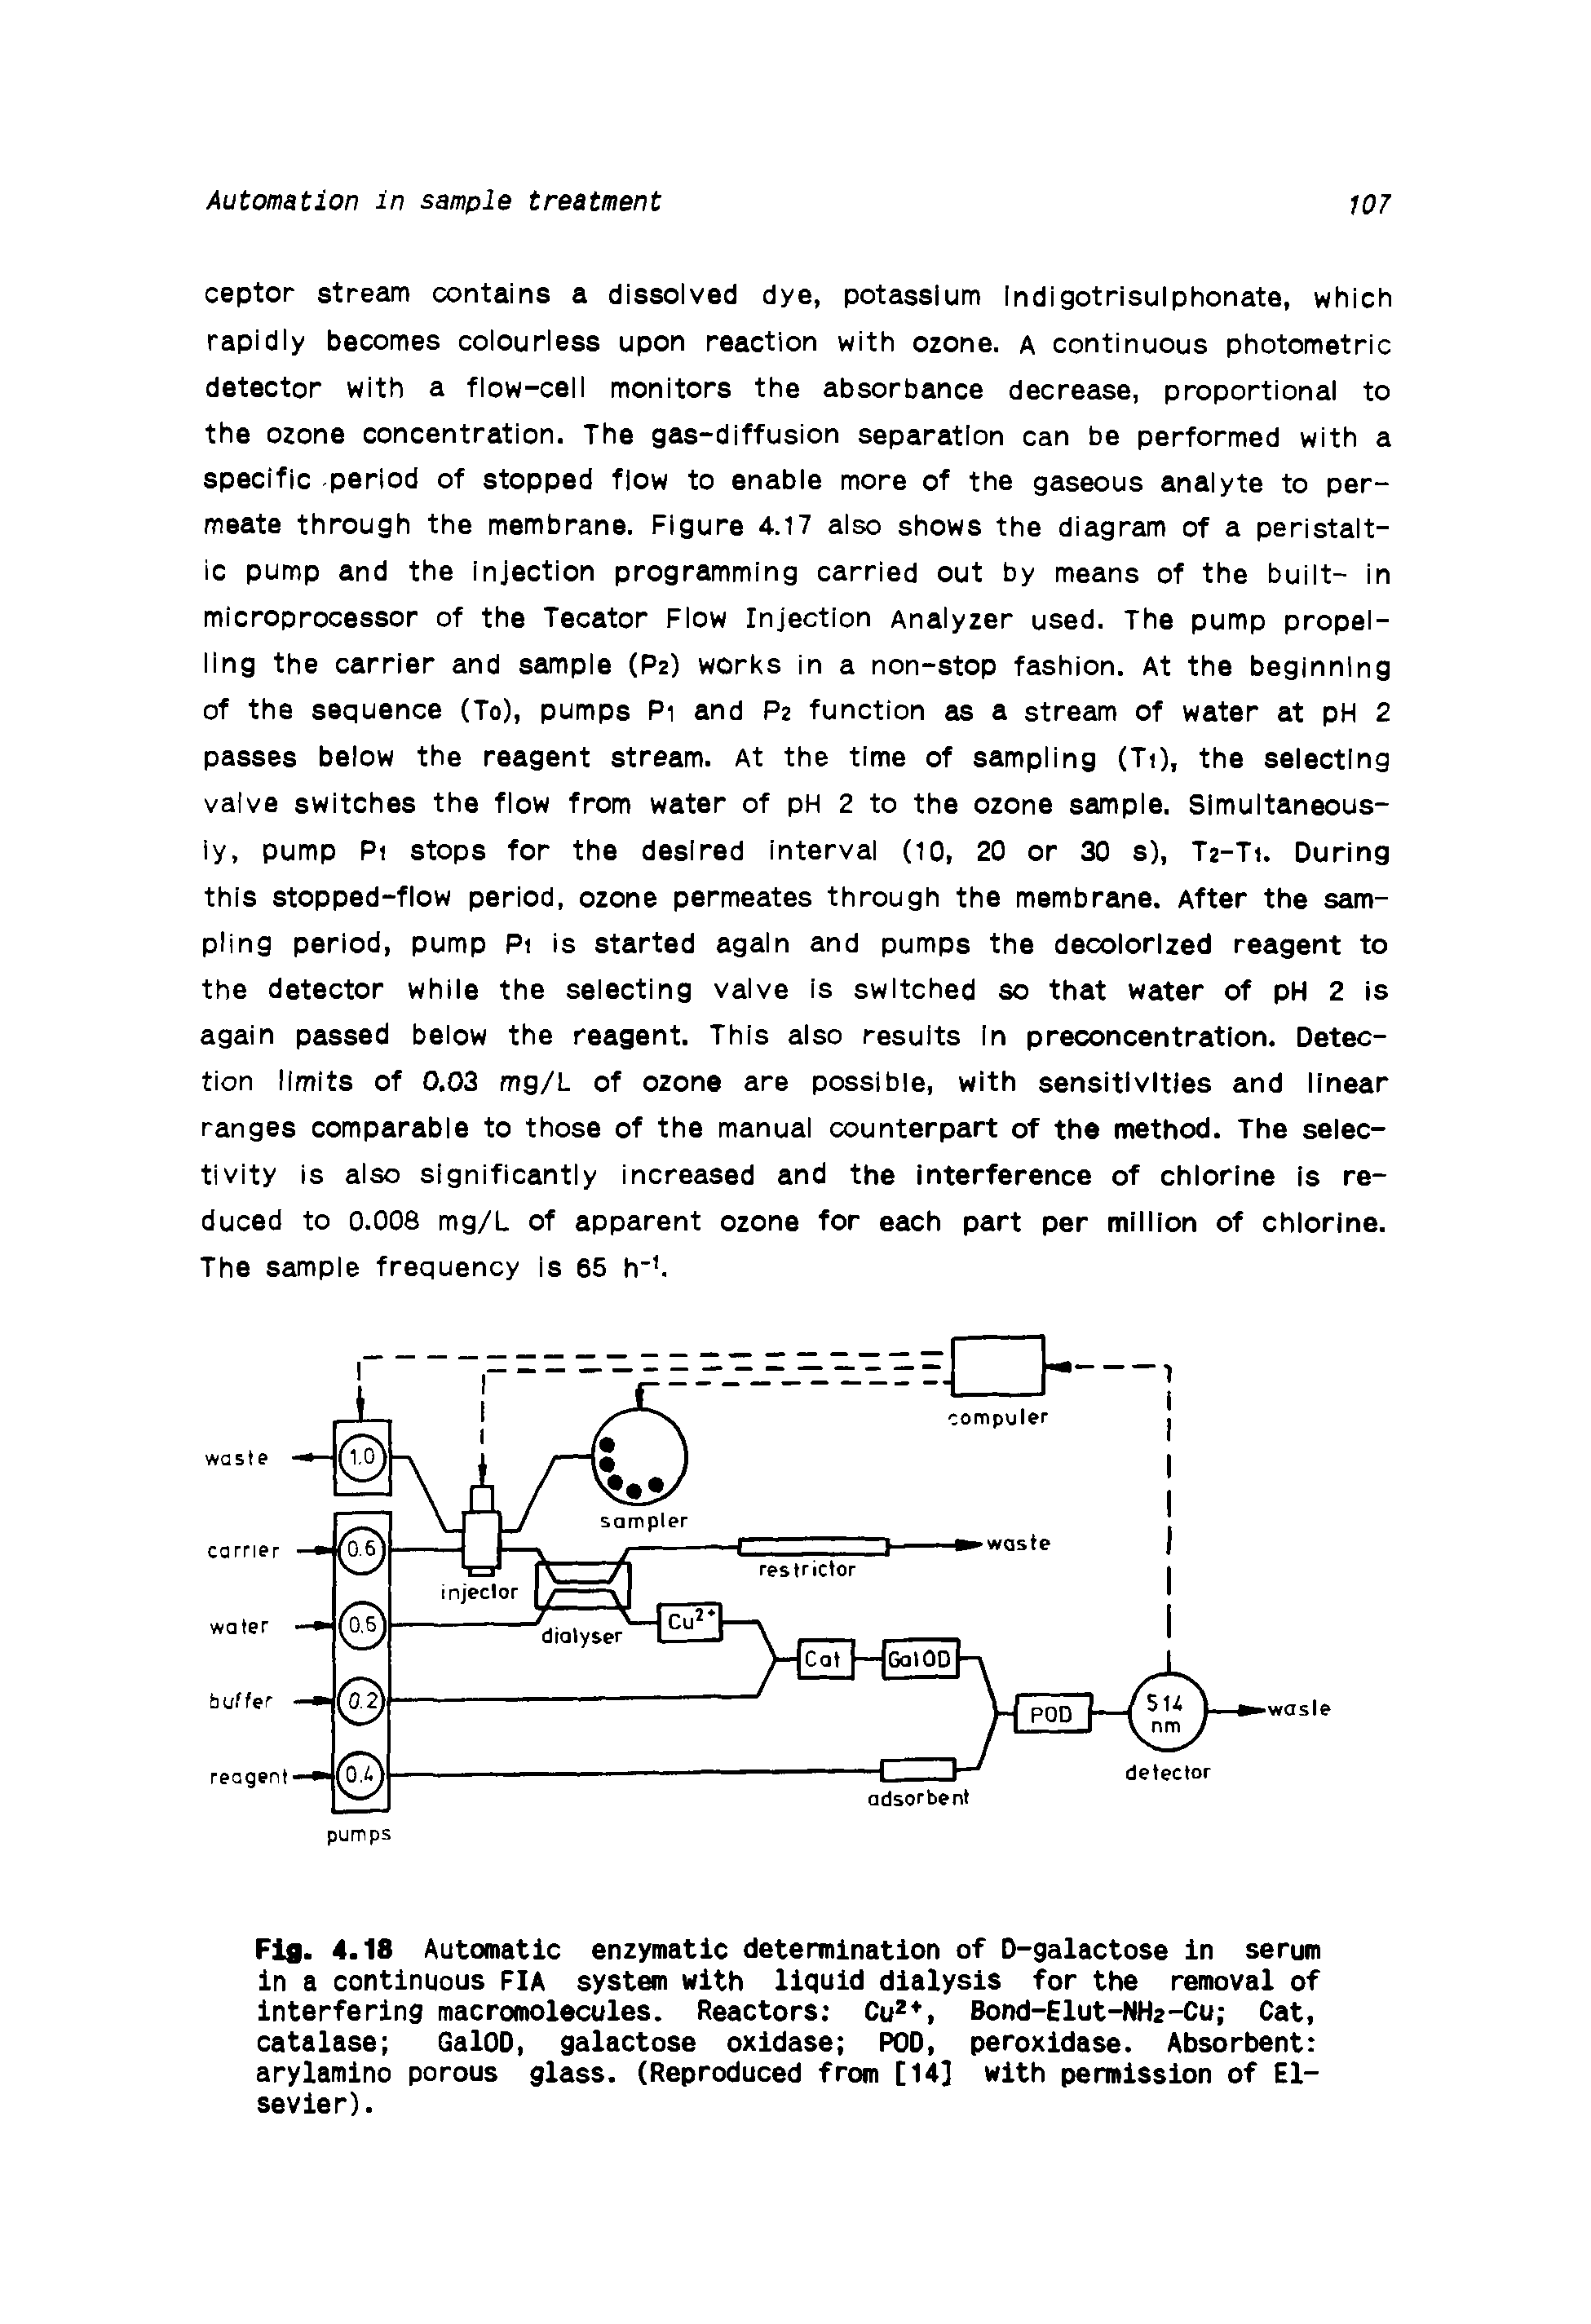 Fig. 4.18 Automatic enzymatic determination of D-galactose in serum in a continuous FIA system with liquid dialysis for the removal of interfering macromolecules. Reactors Cu2t, Bond-Elut-NHz-Cu Cat, catalase GalOD, galactose oxidase POD, peroxidase. Absorbent arylamino porous glass. (Reproduced from [14] with permission of Elsevier).